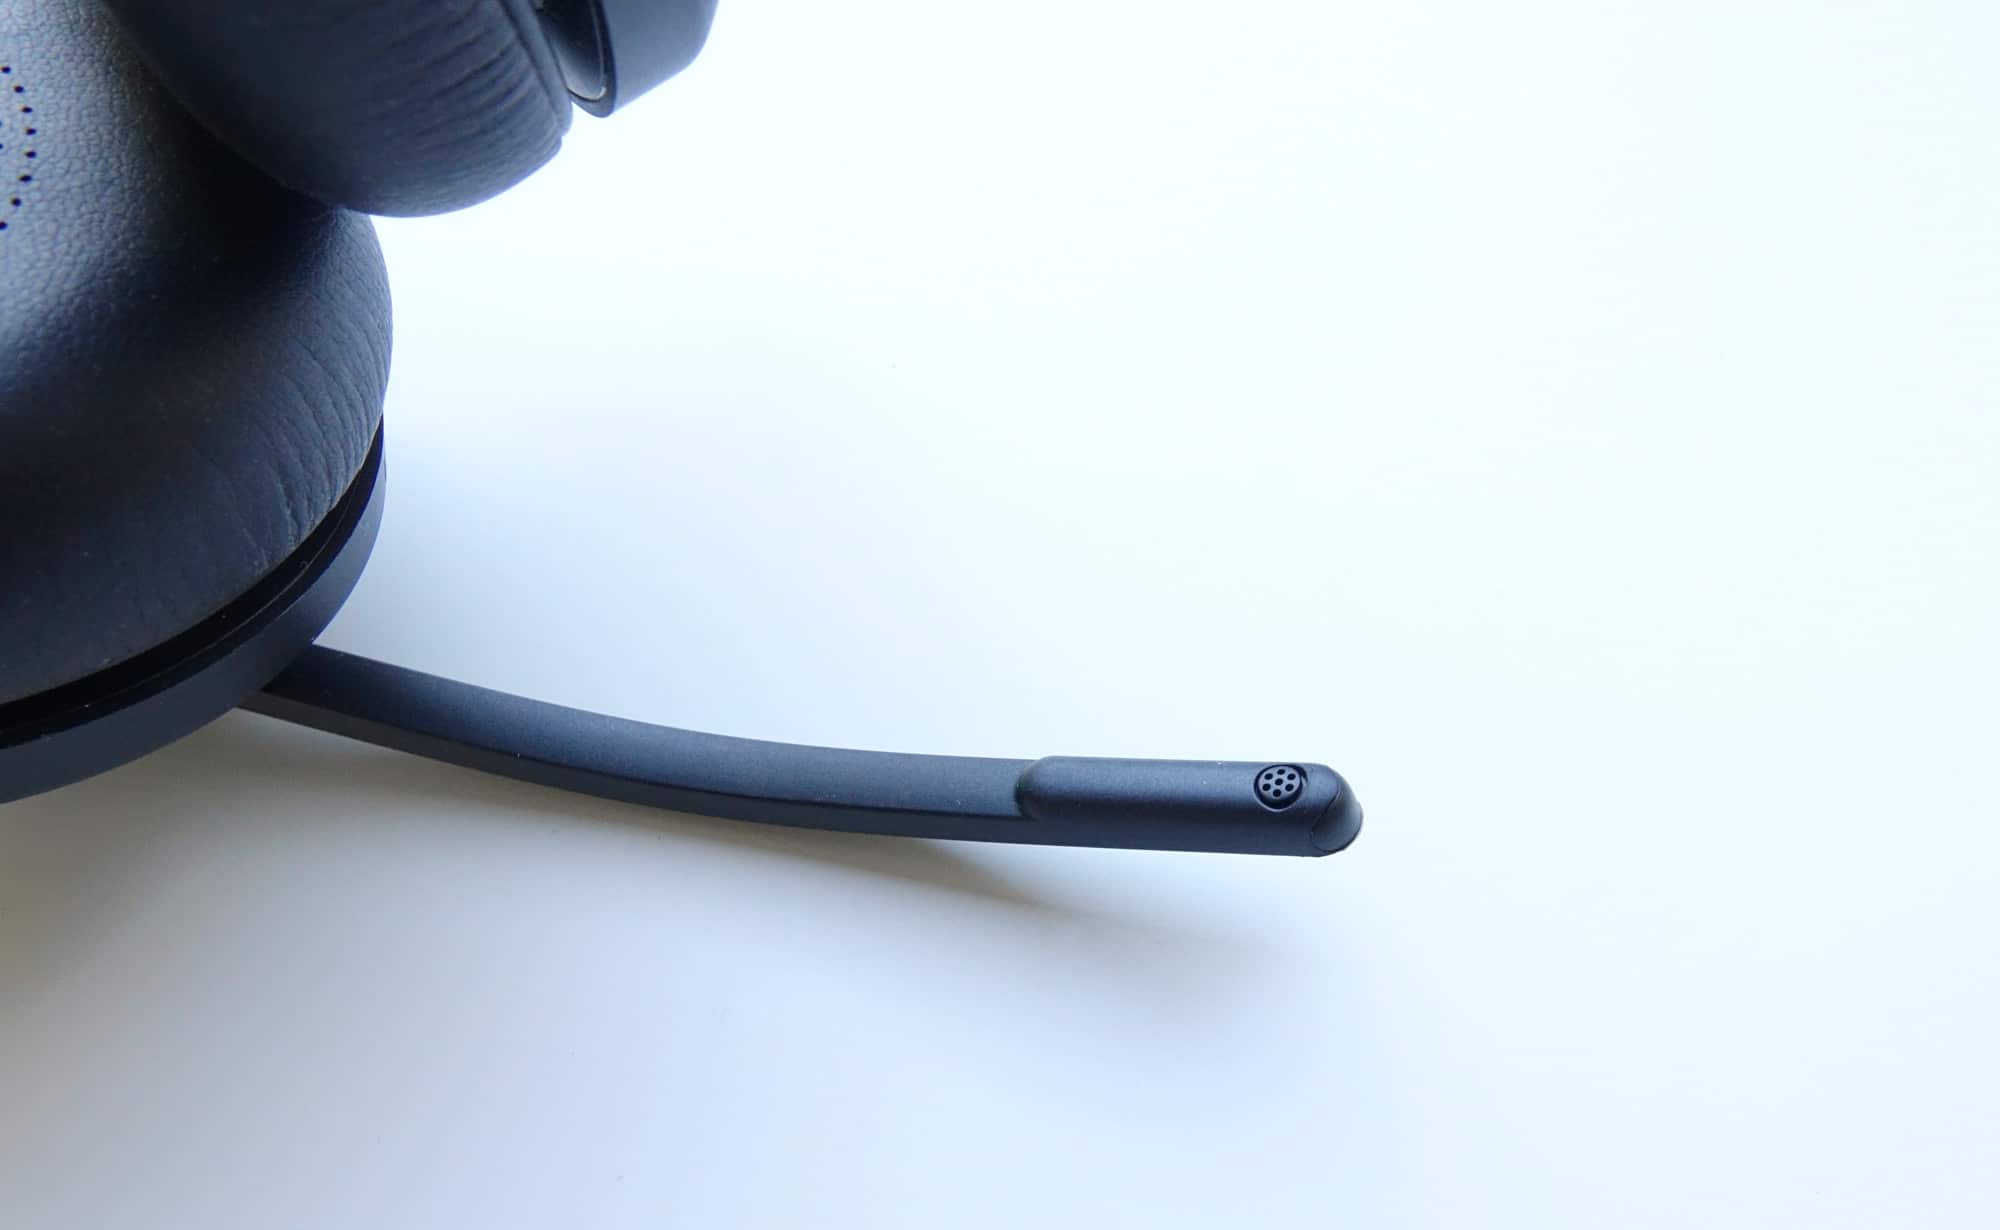 The microphone on the Jabra Evolve2 65 headset